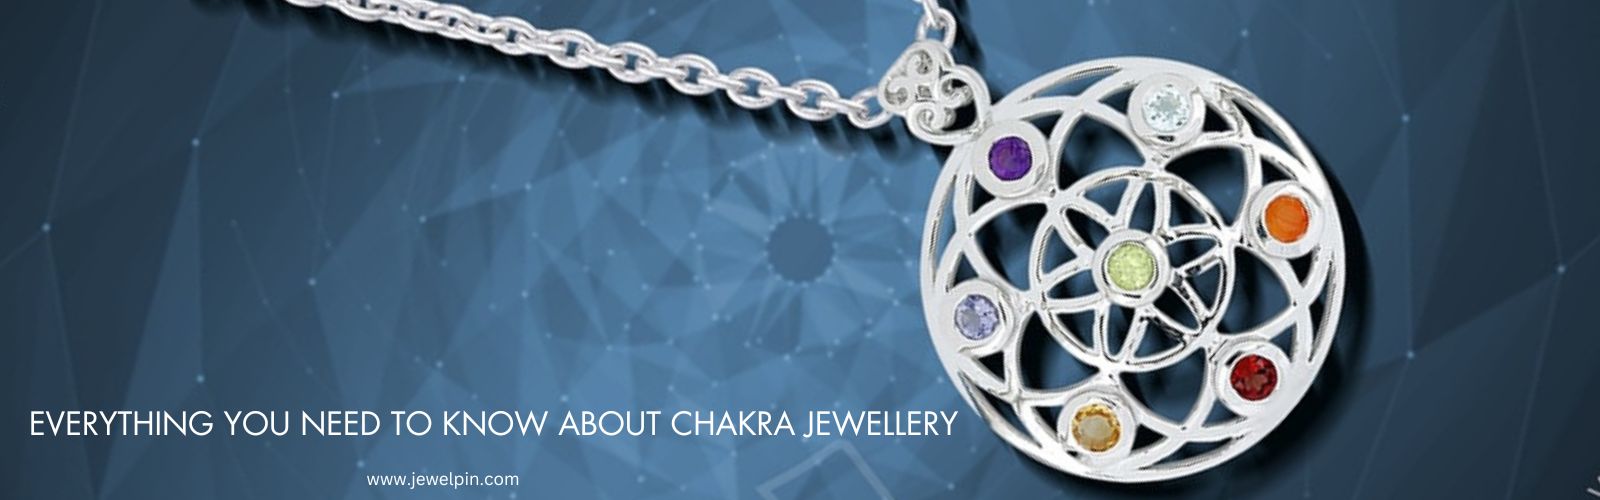 everything you need to know about chakra jewellery